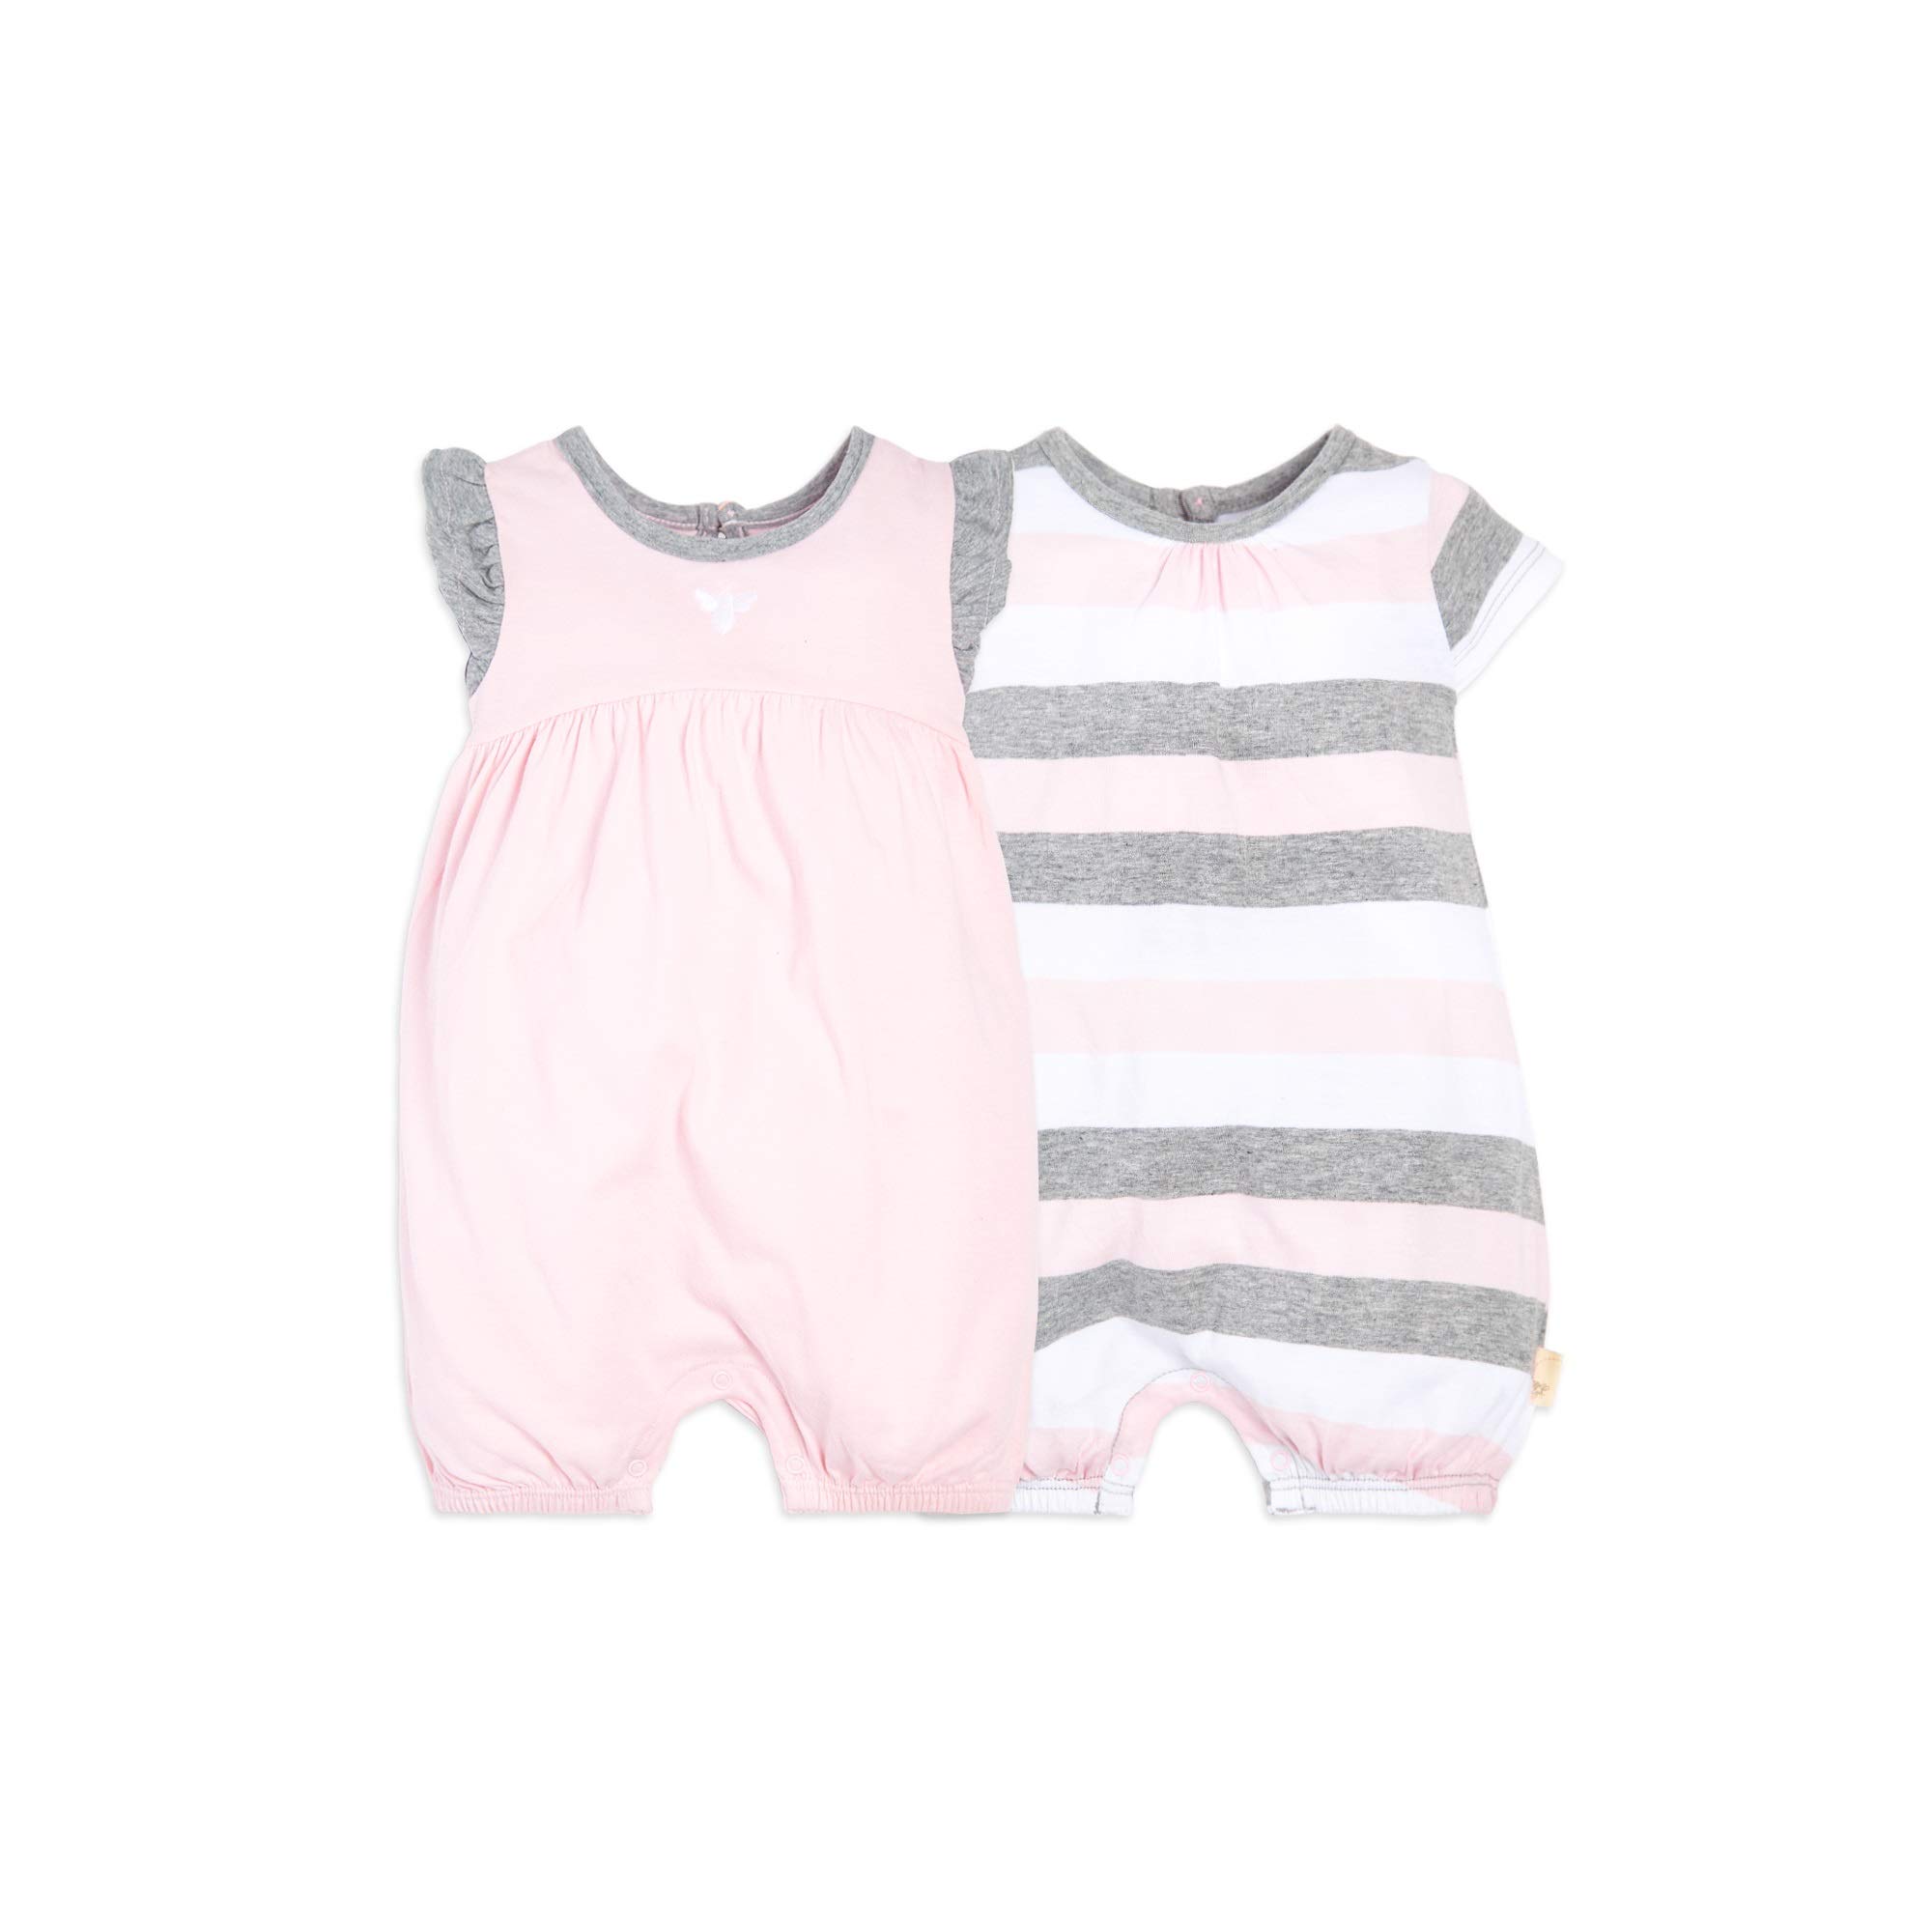 Burt's Bees Baby Baby Girl's Rompers, Set of 2 Bubbles, One Piece Jumpsuits, 100% Organic Cotton